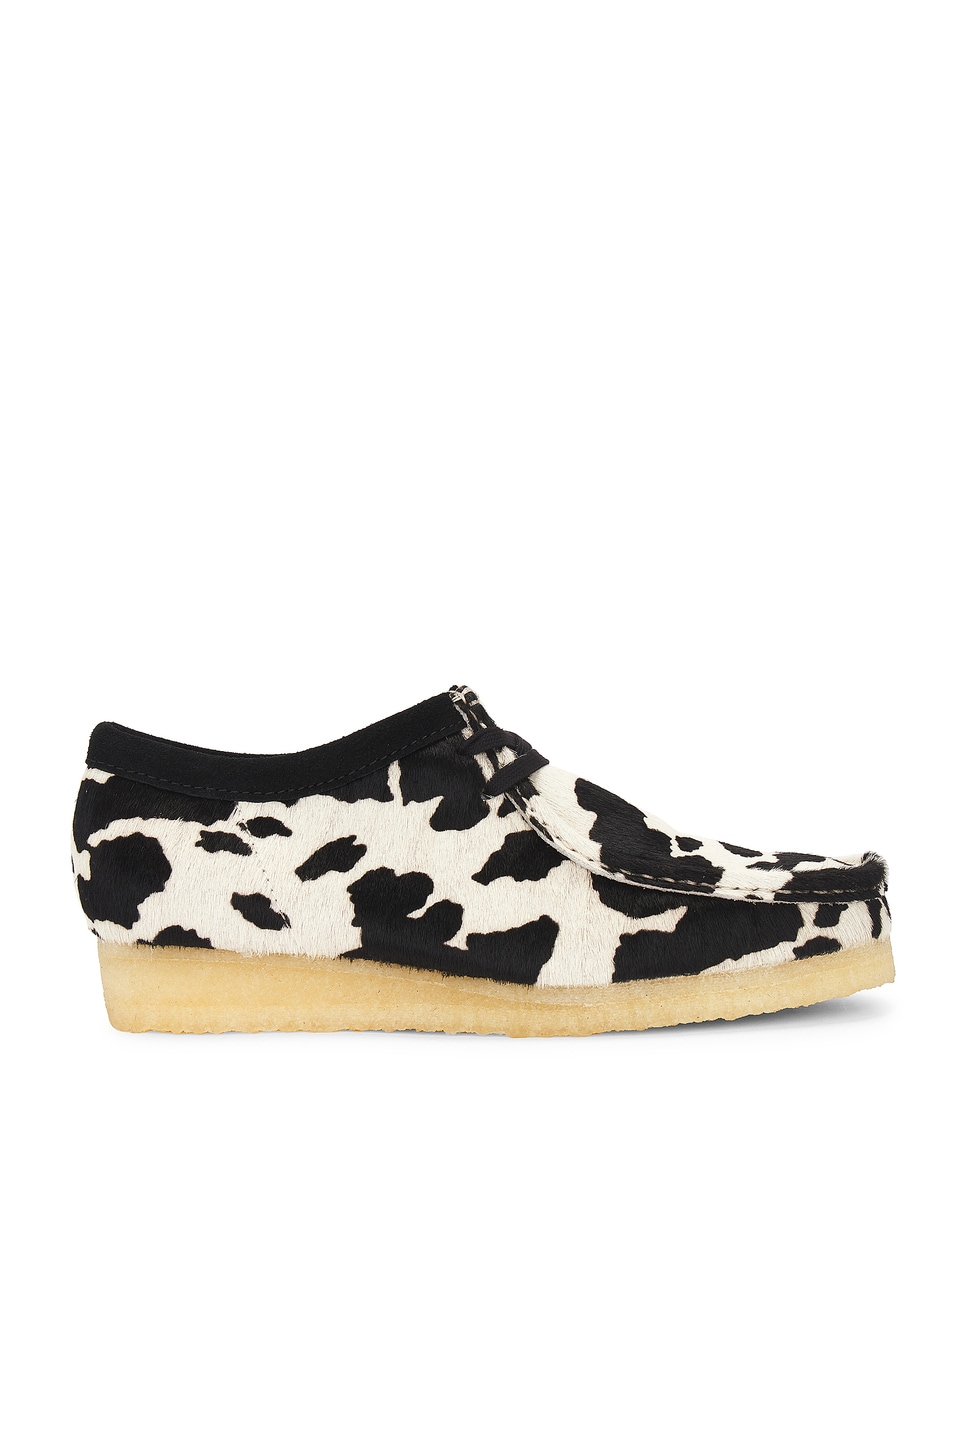 Image 1 of Clarks Wallabee Boot in Cow Print Hair On